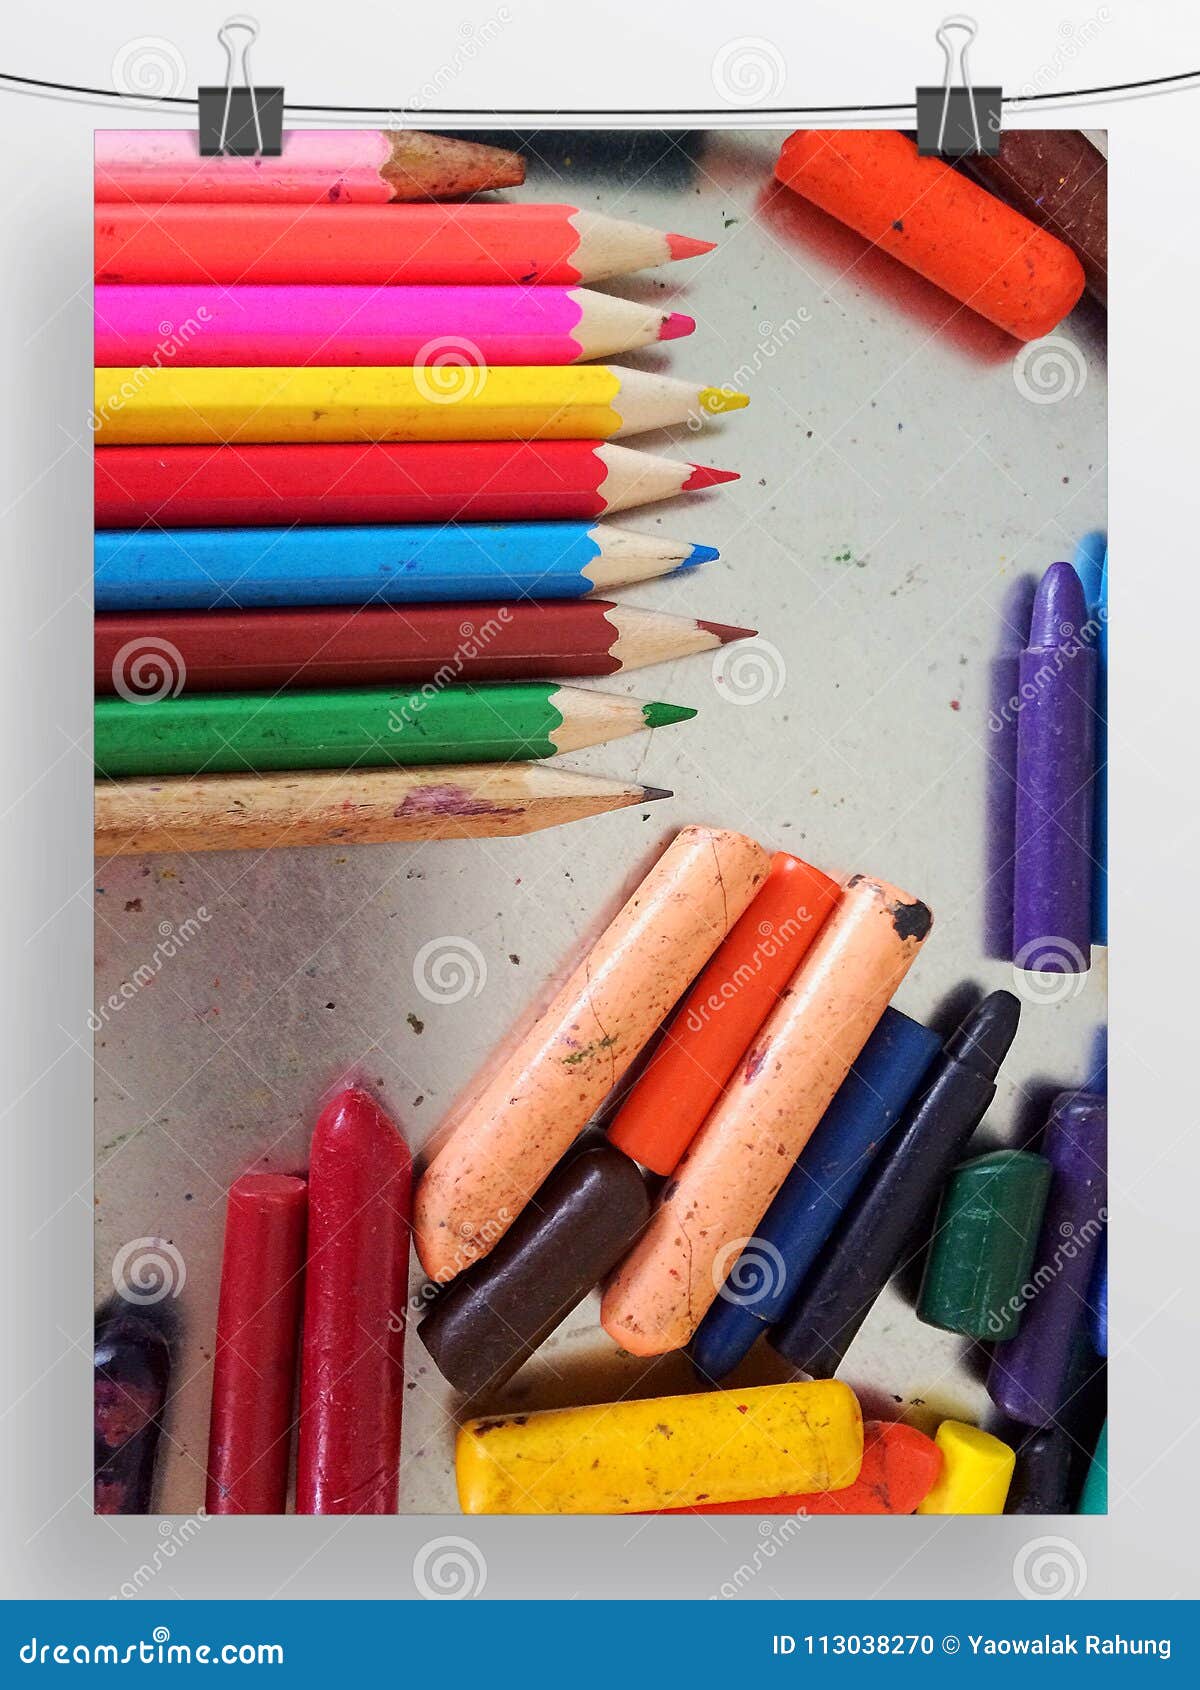 Crayons Art Texture Pattern Stock Photo - Image of crayons, colored ...